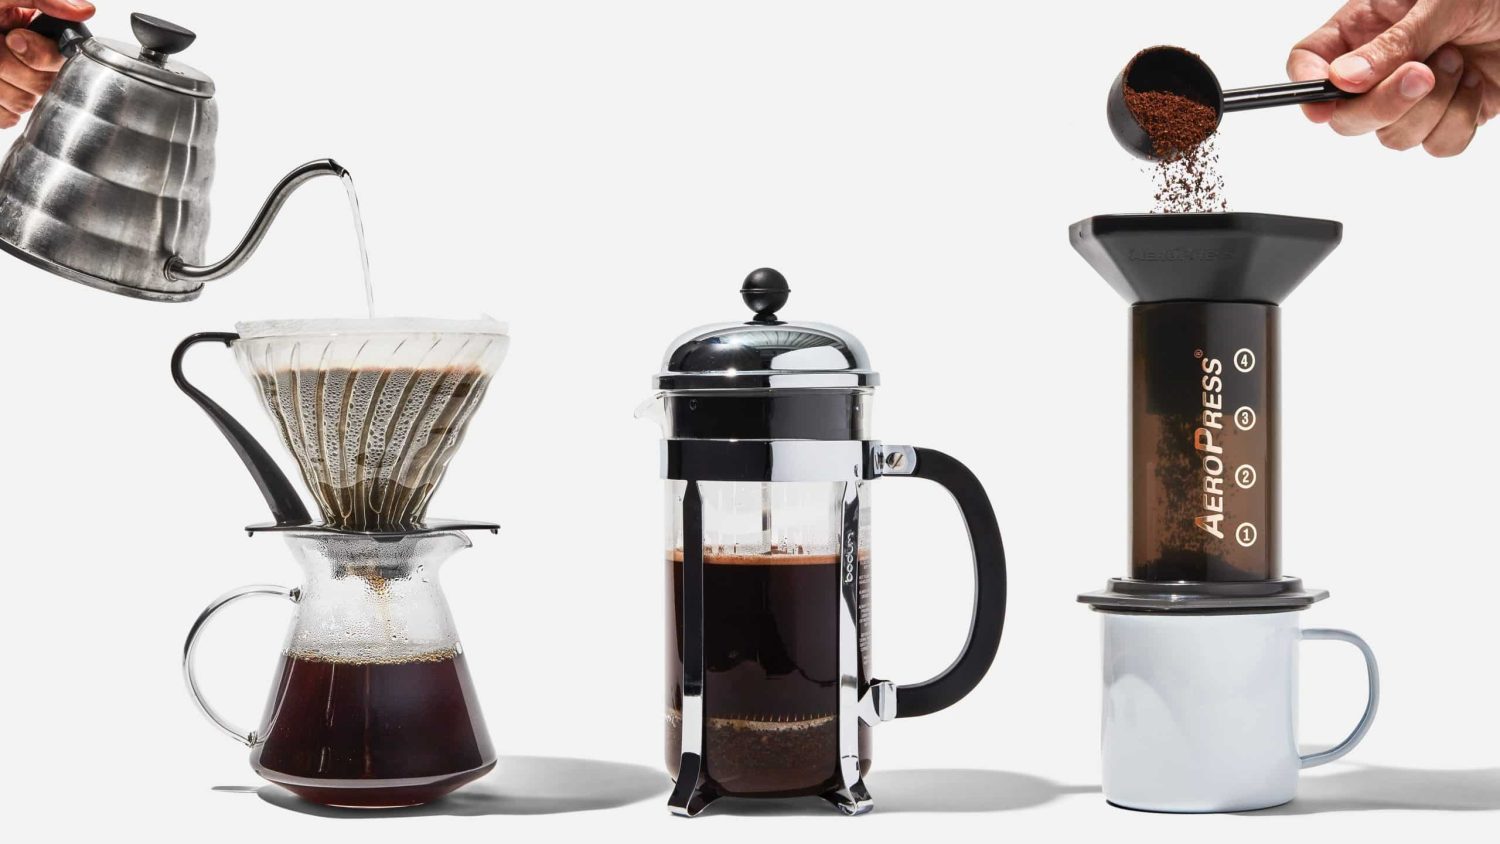 What Coffee To Use In A Drip Coffee Maker?